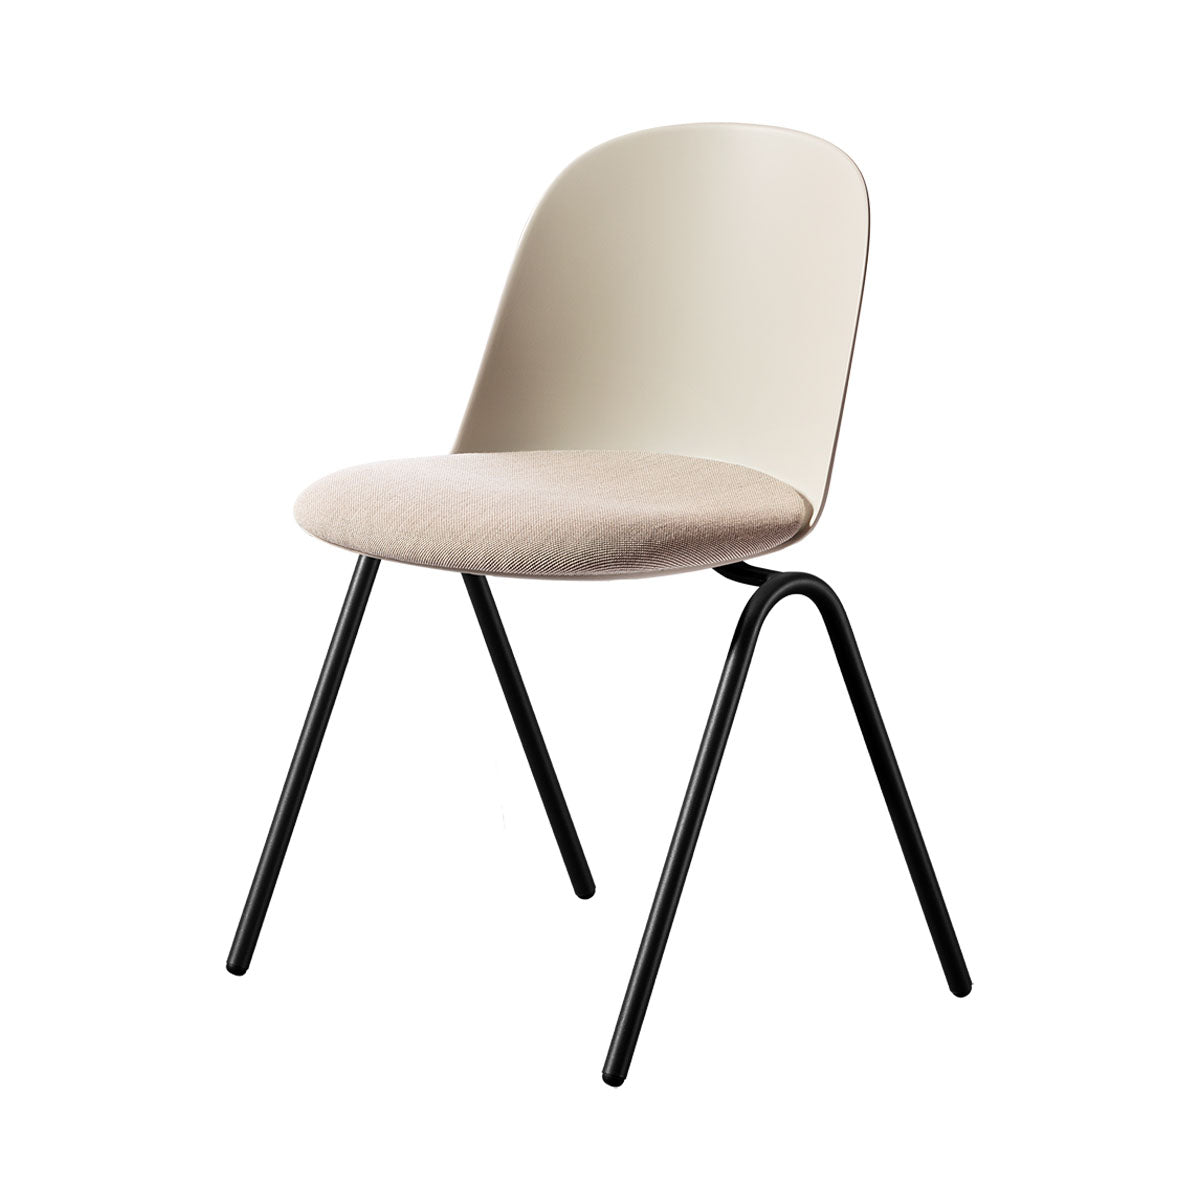 Mariolina Conference Chair: Upholstered + Silk Grey + Lacquered Anthracite